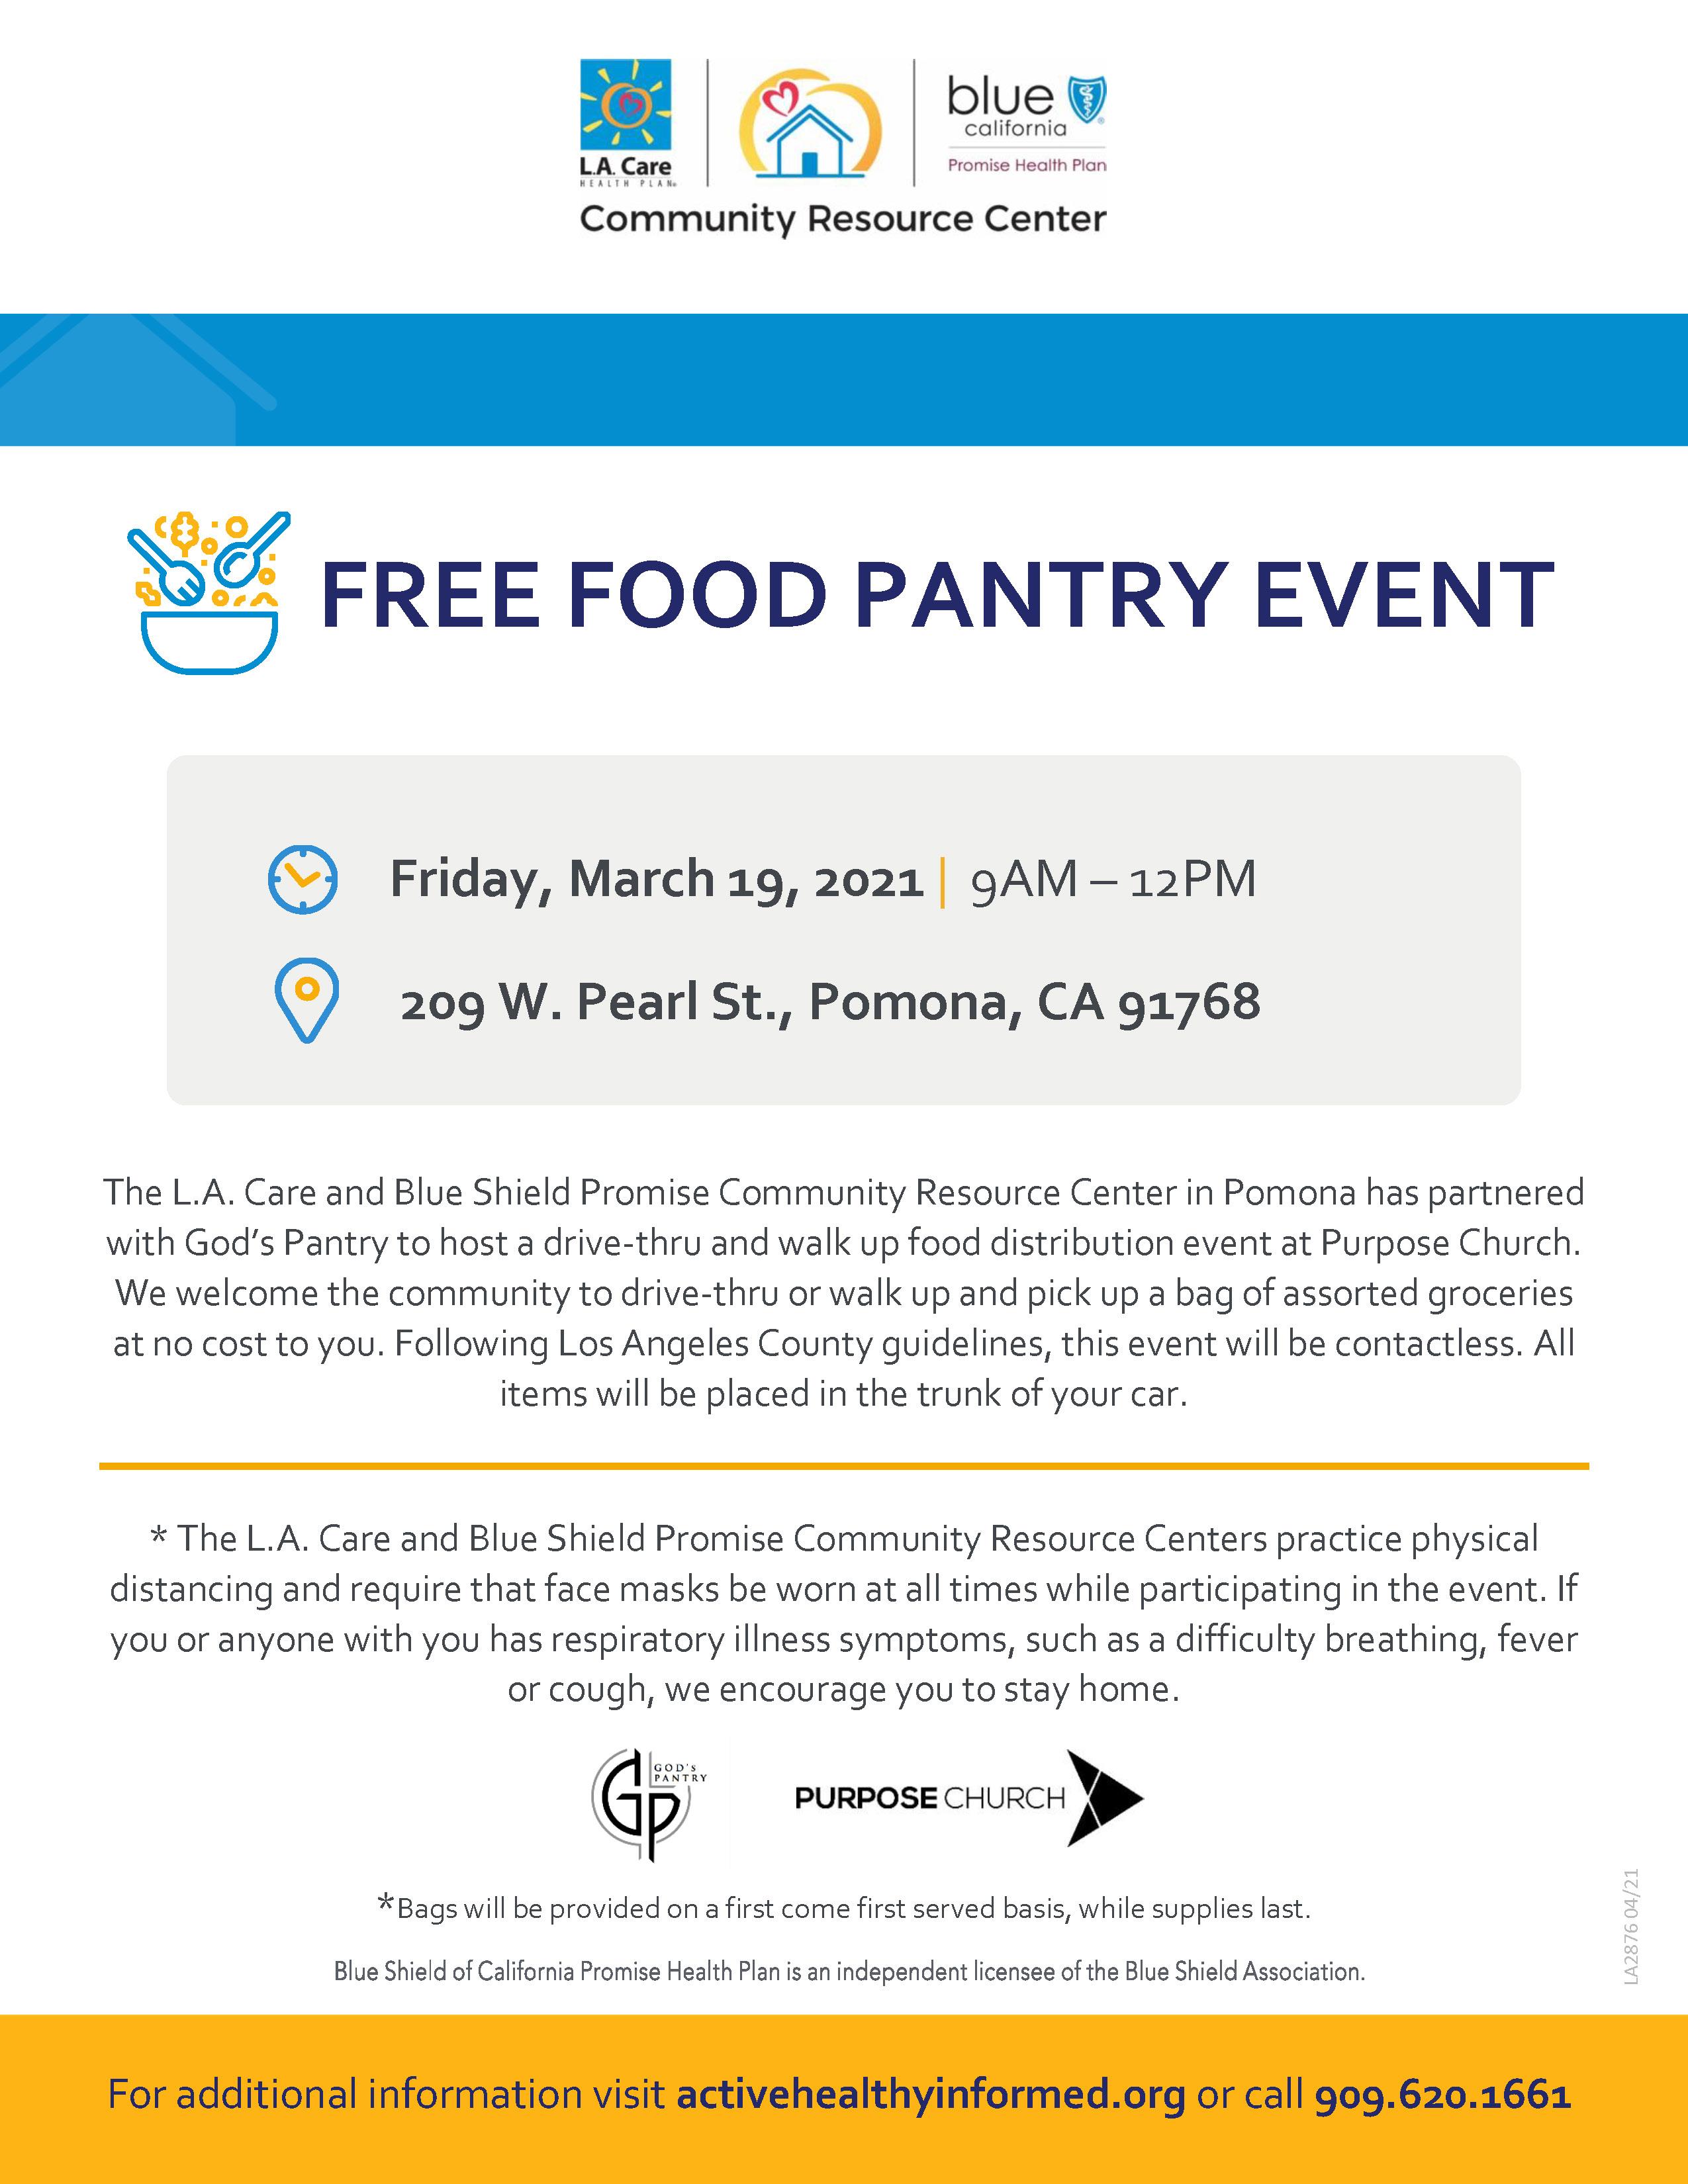 Image of attached pdf flyer, food pantry event